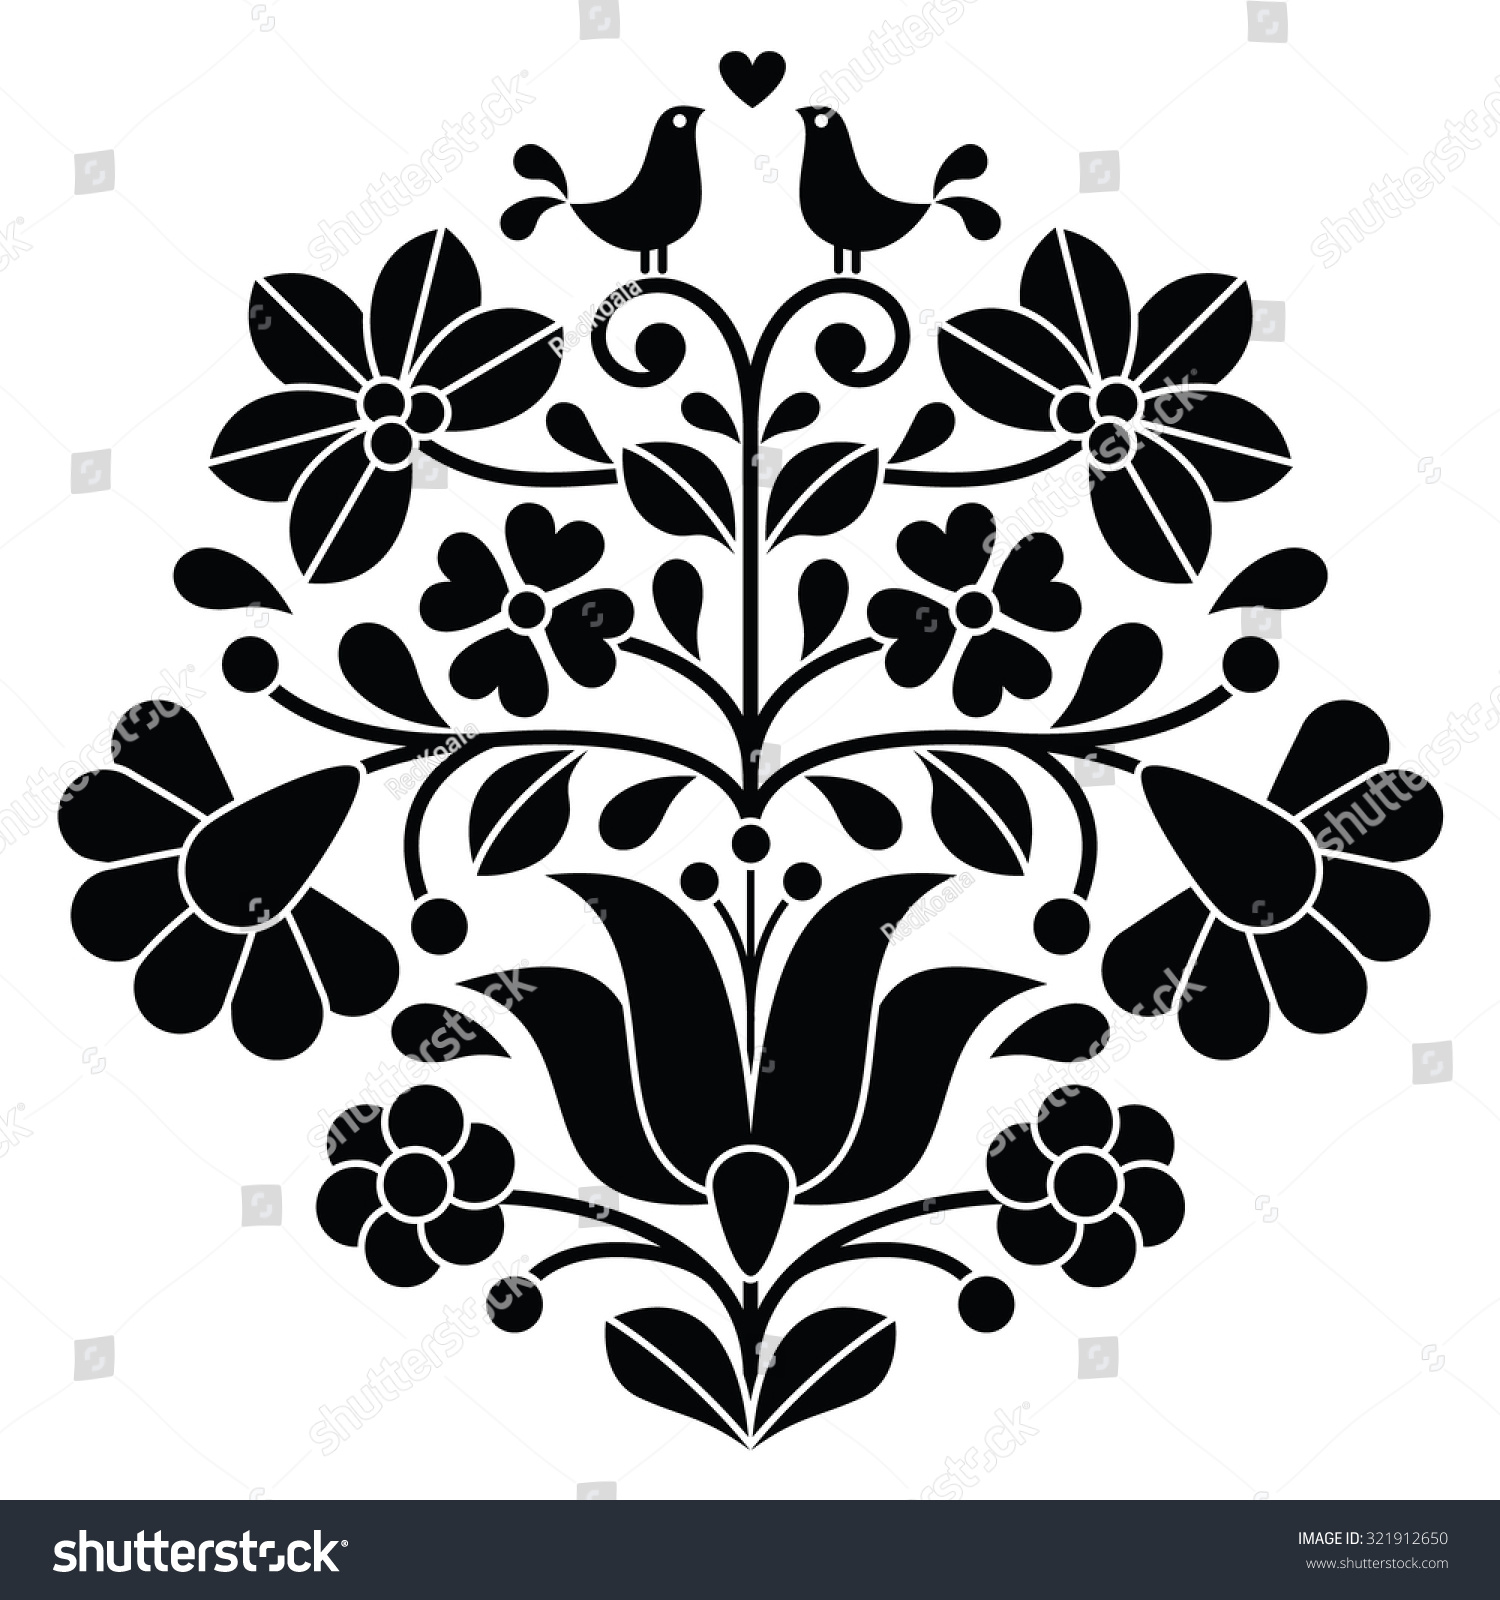 Kalocsai Black Embroidery - Hungarian Floral Folk Pattern With Birds ...